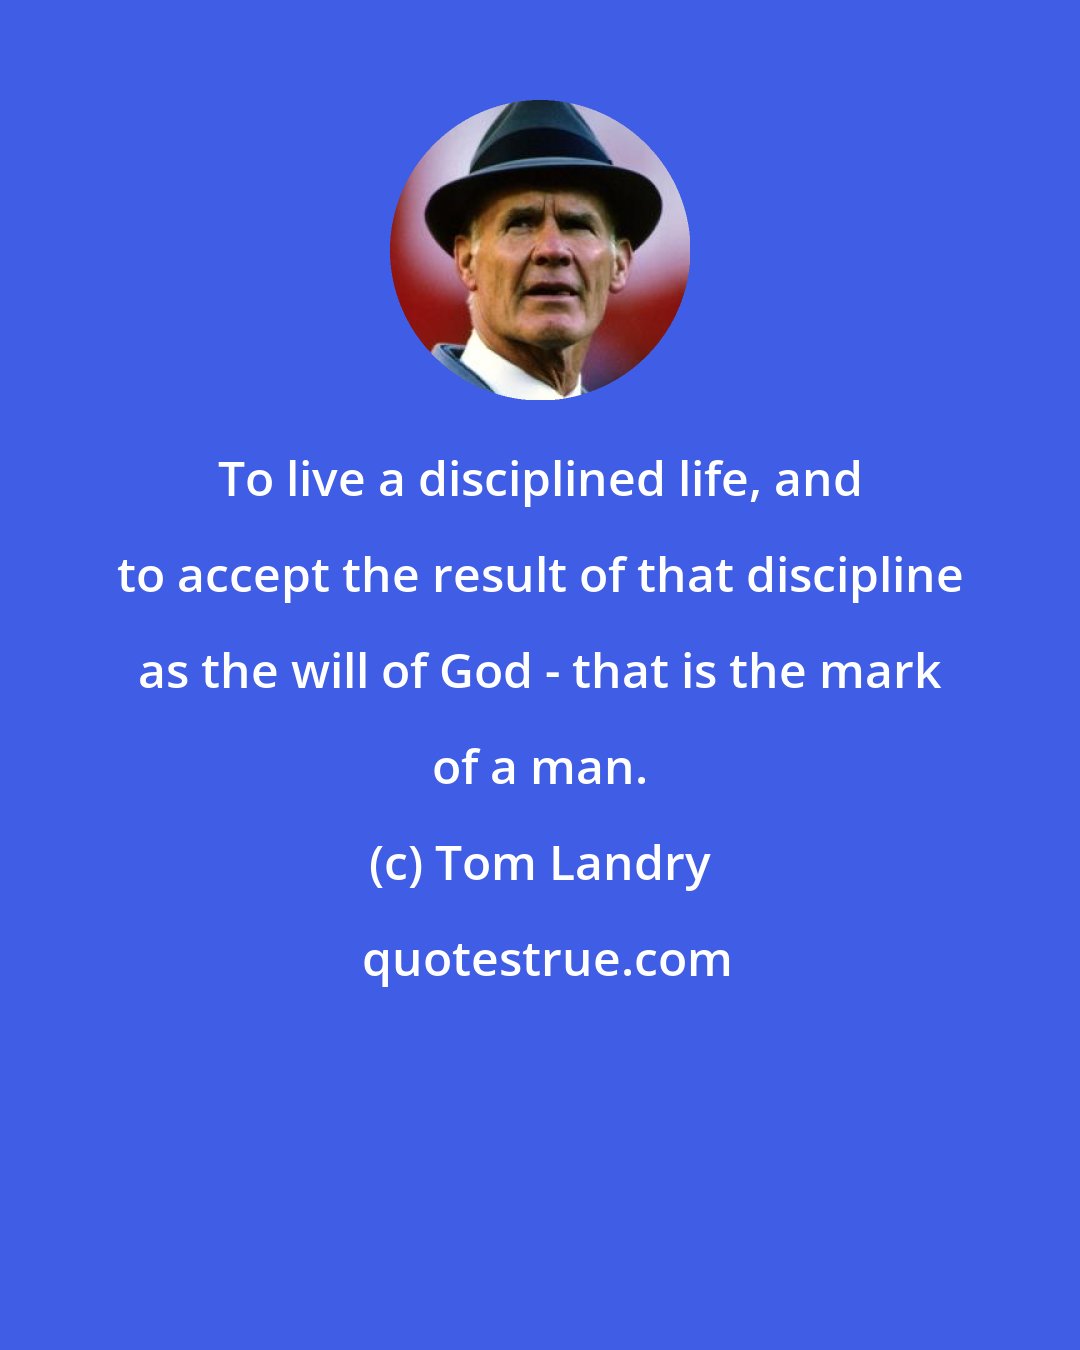 Tom Landry: To live a disciplined life, and to accept the result of that discipline as the will of God - that is the mark of a man.